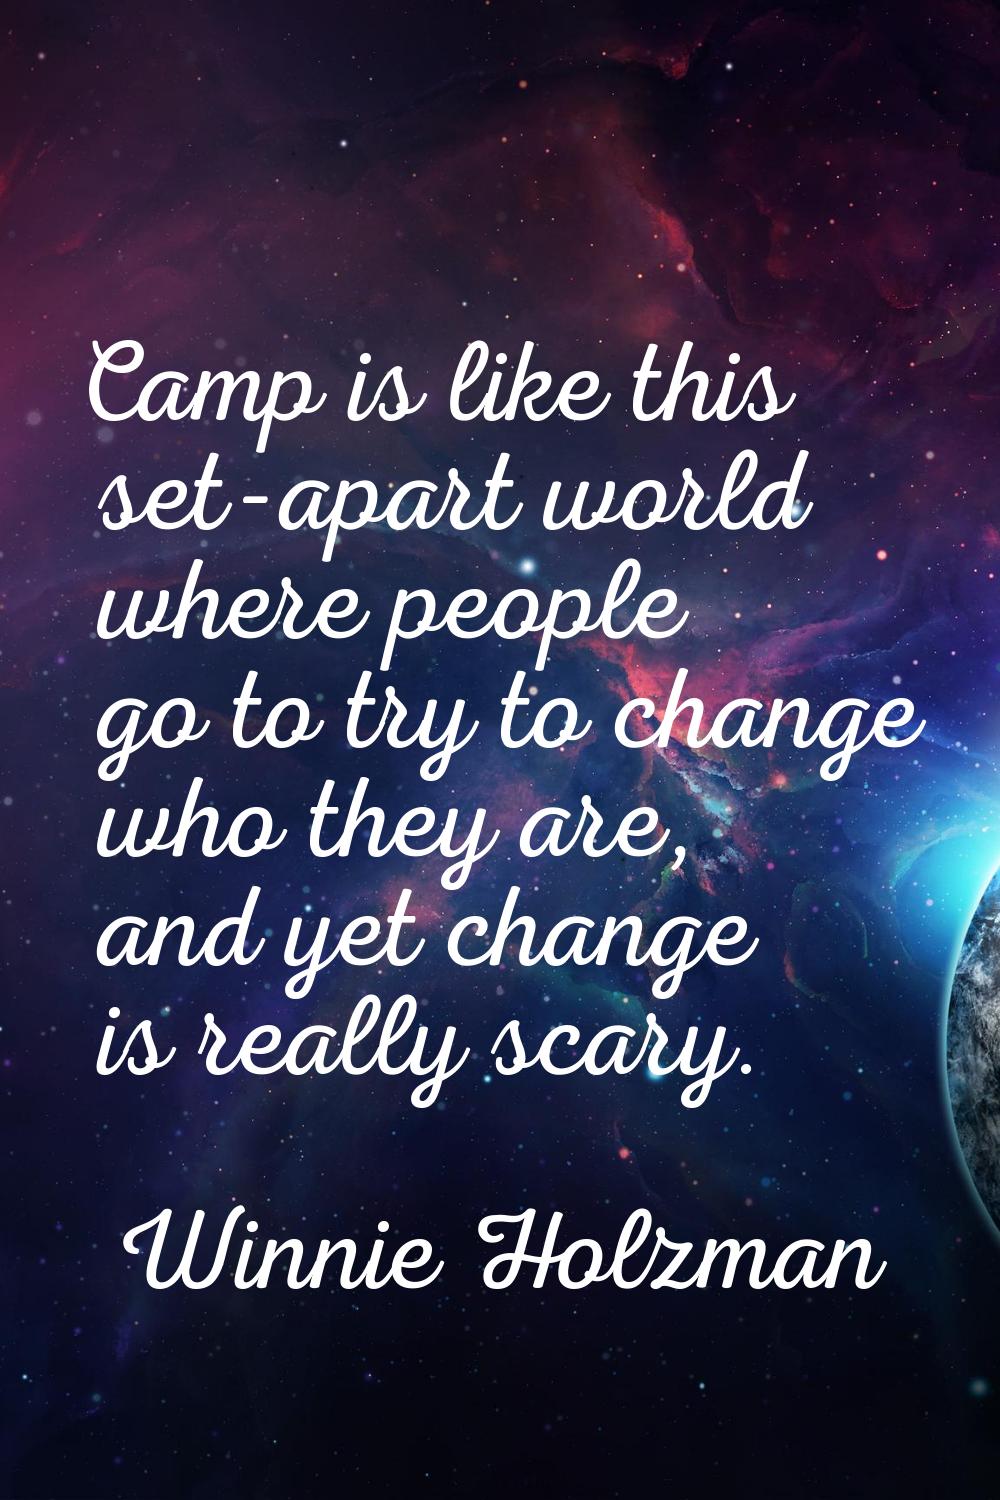 Camp is like this set-apart world where people go to try to change who they are, and yet change is 